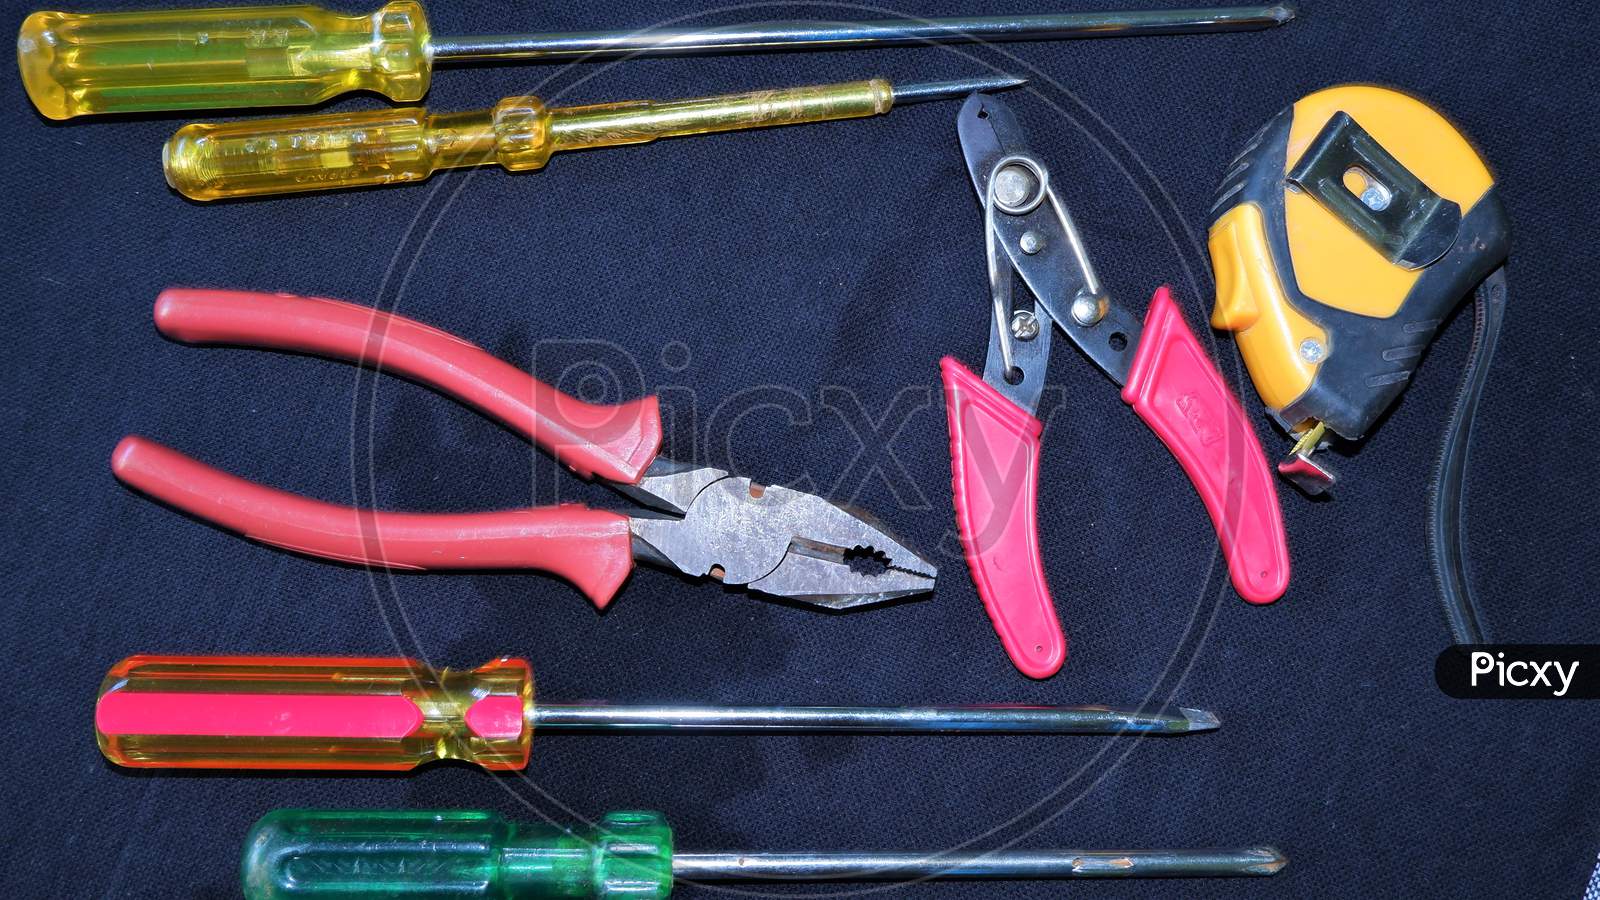 ASSORTED ELECTRICAL TOOLS ON BLACK BACKGROUND